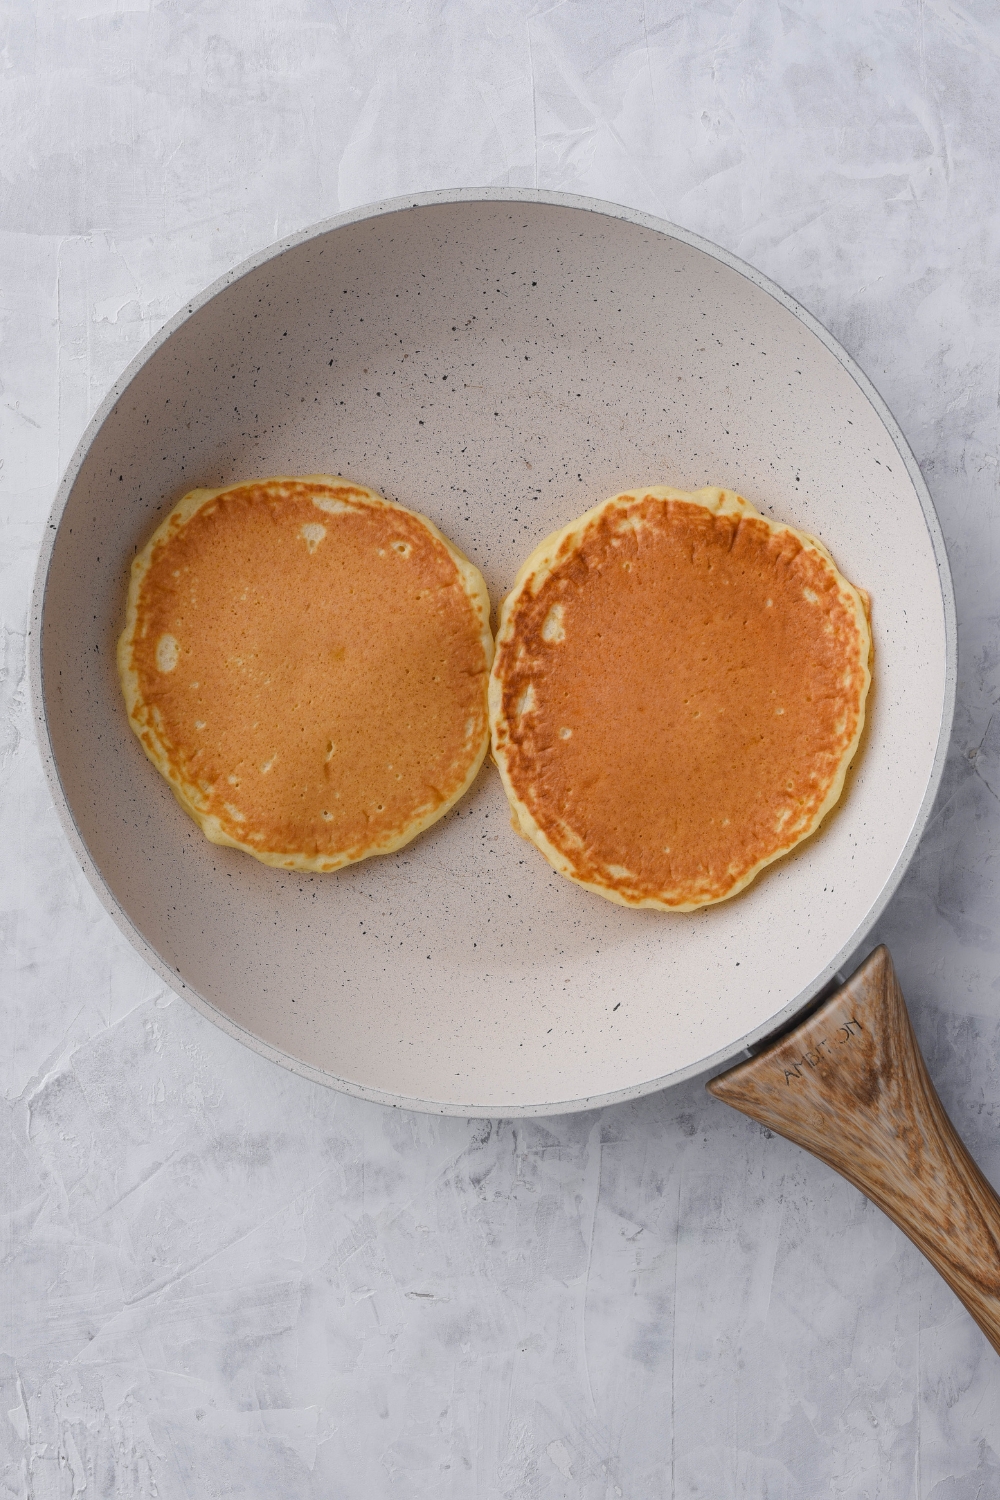 A skillet with two golden brown pancakes.